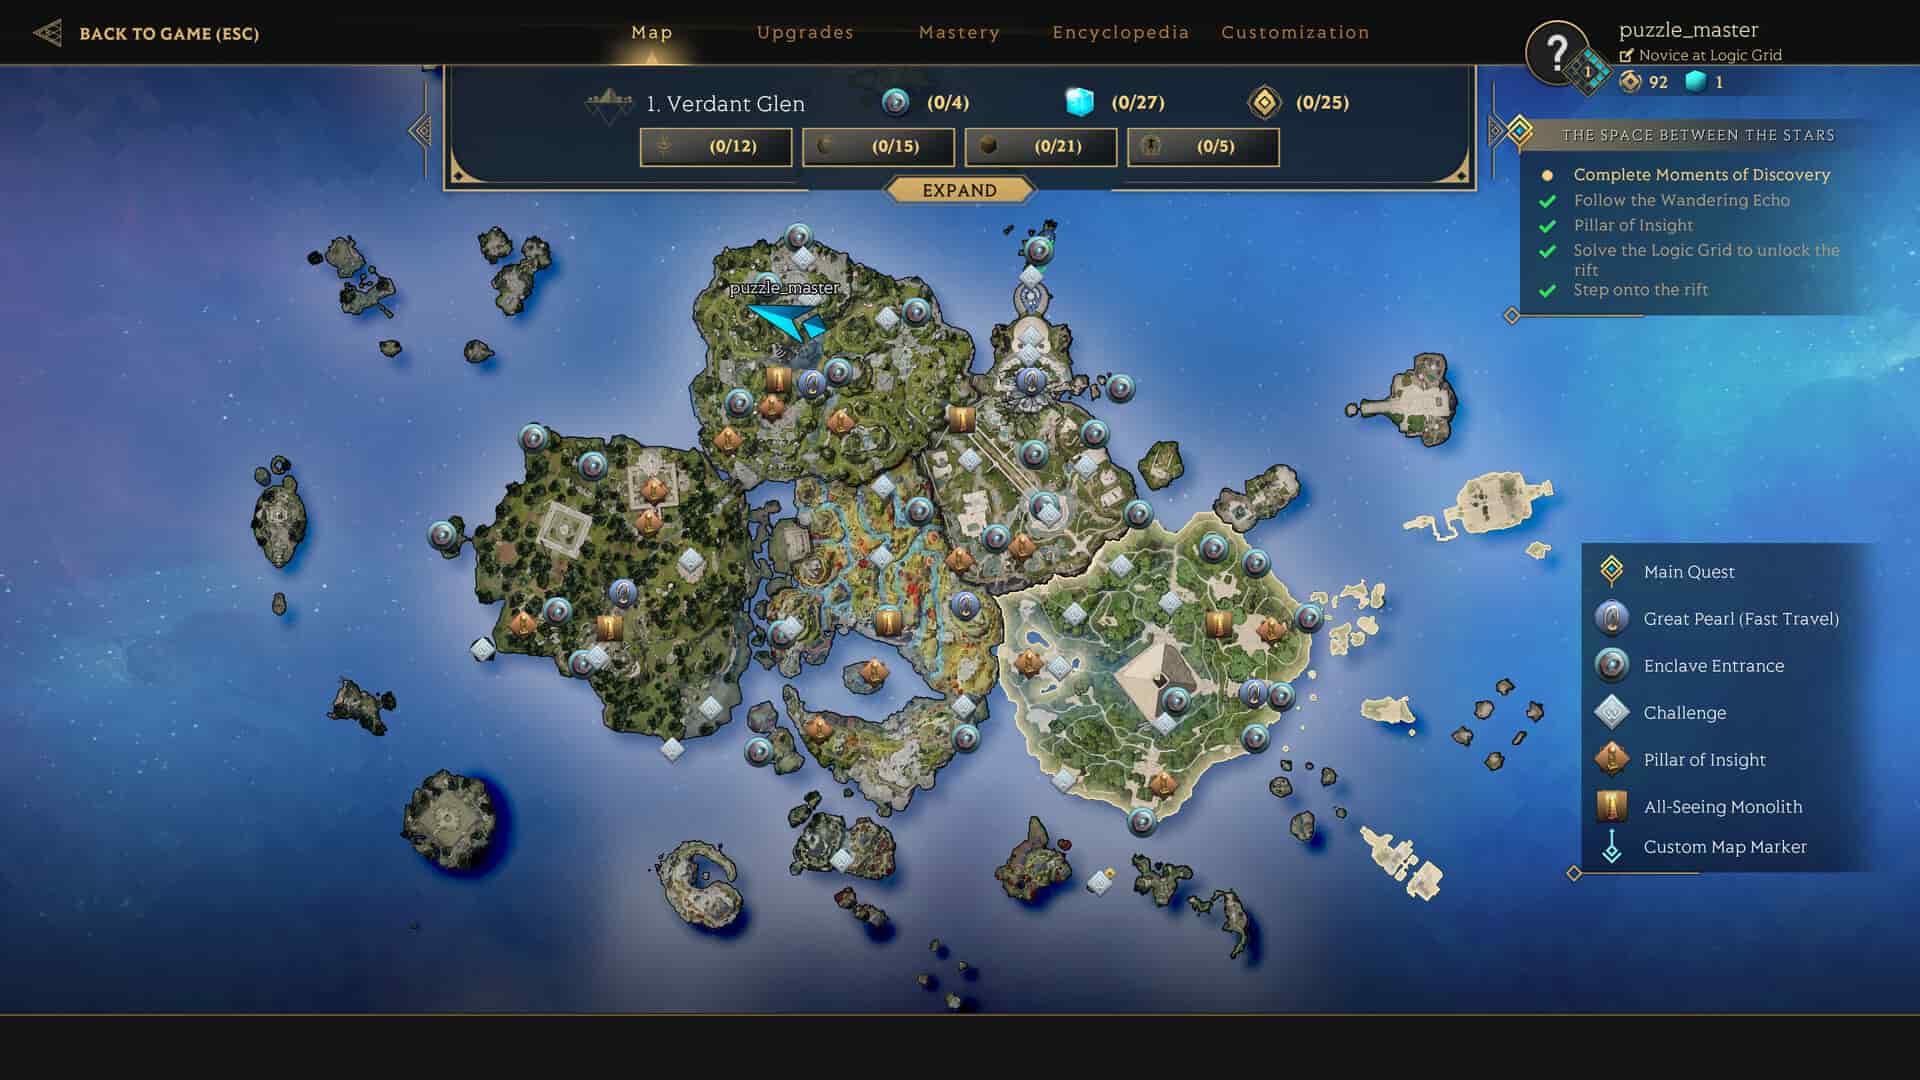 Islands of Insight main quest not updating or progressing issue: How to fix it?